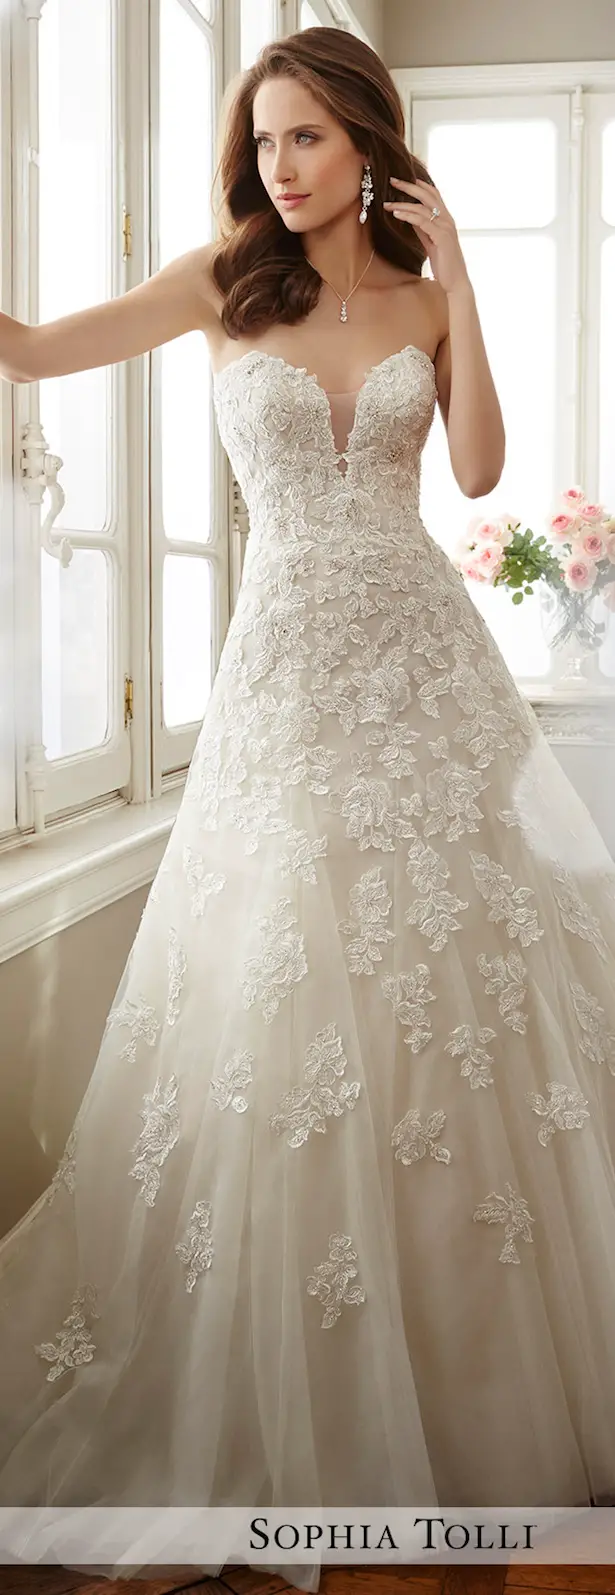 Wedding Dress by Sophia Tolli Spring 2017 Bridal Collection